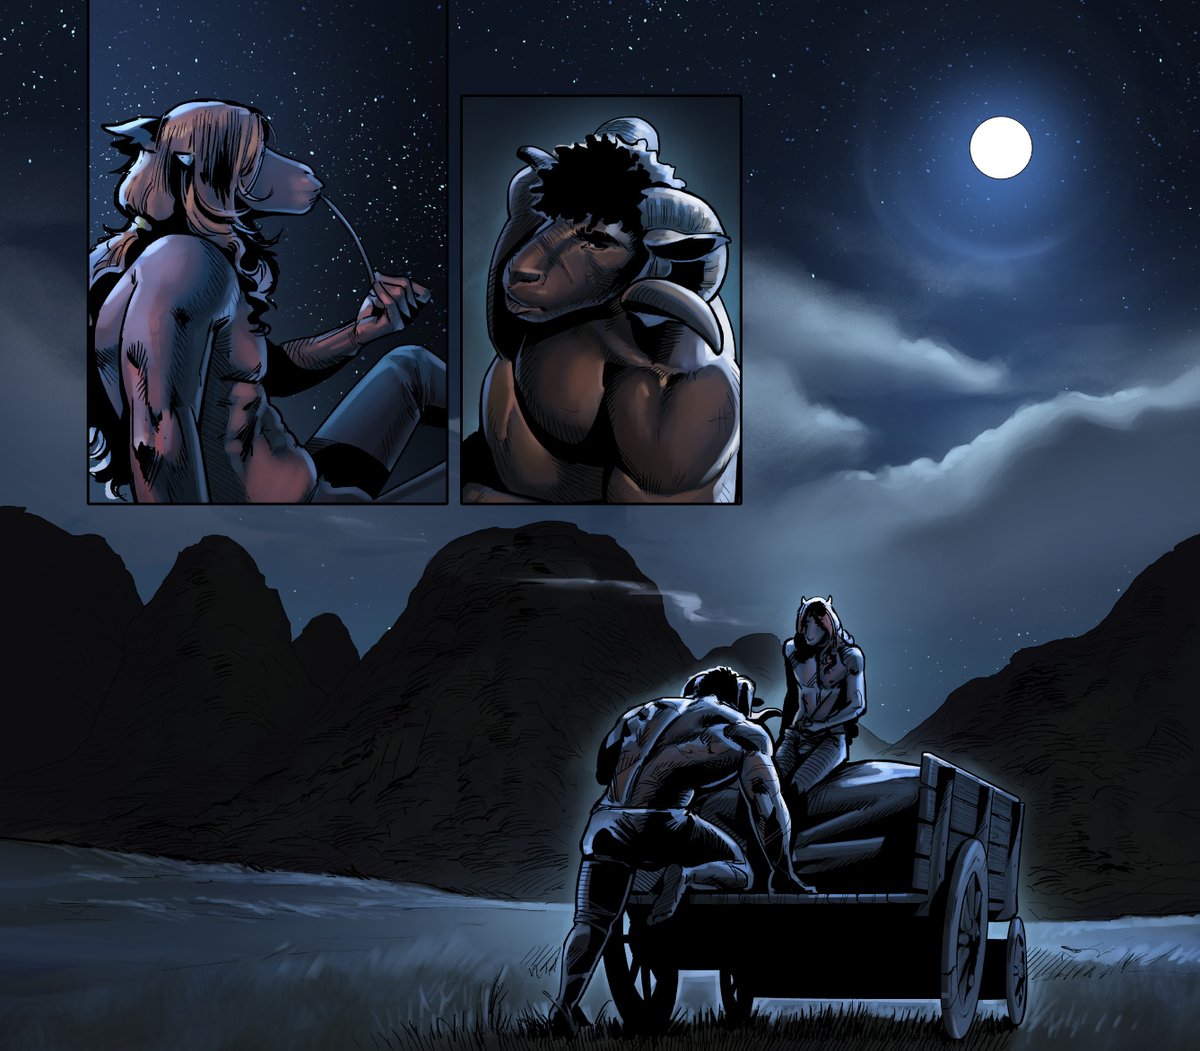 latest page preview! dang I'm going to figure out how to light night scenes eventually